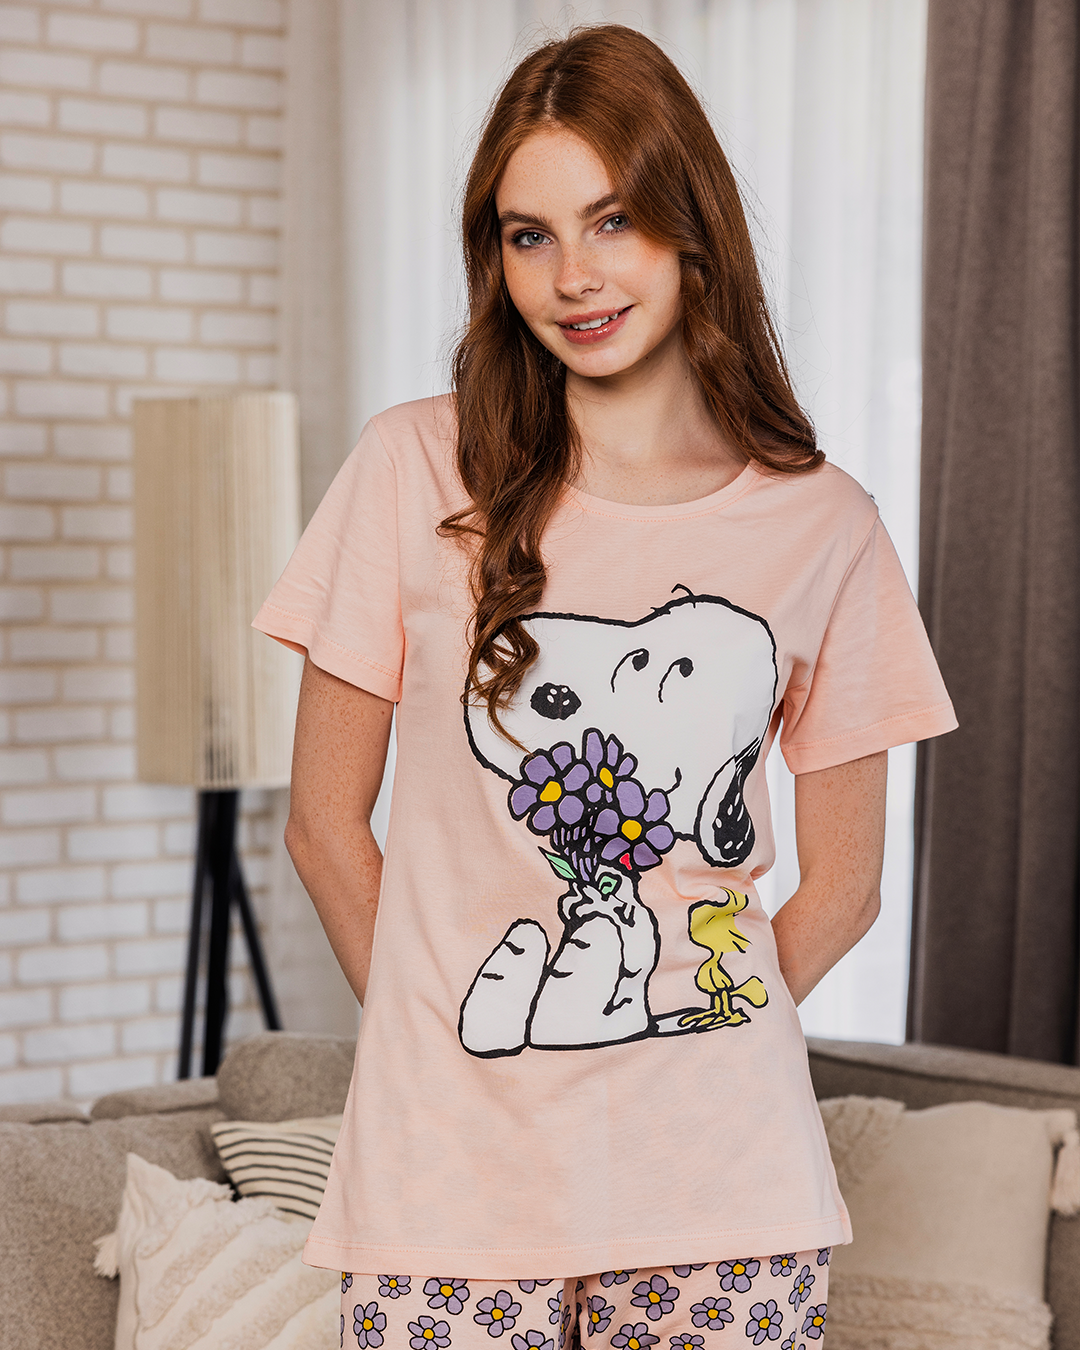 Snoopy Women's pajamas, half-sleeved T-shirt and Snoopy pants